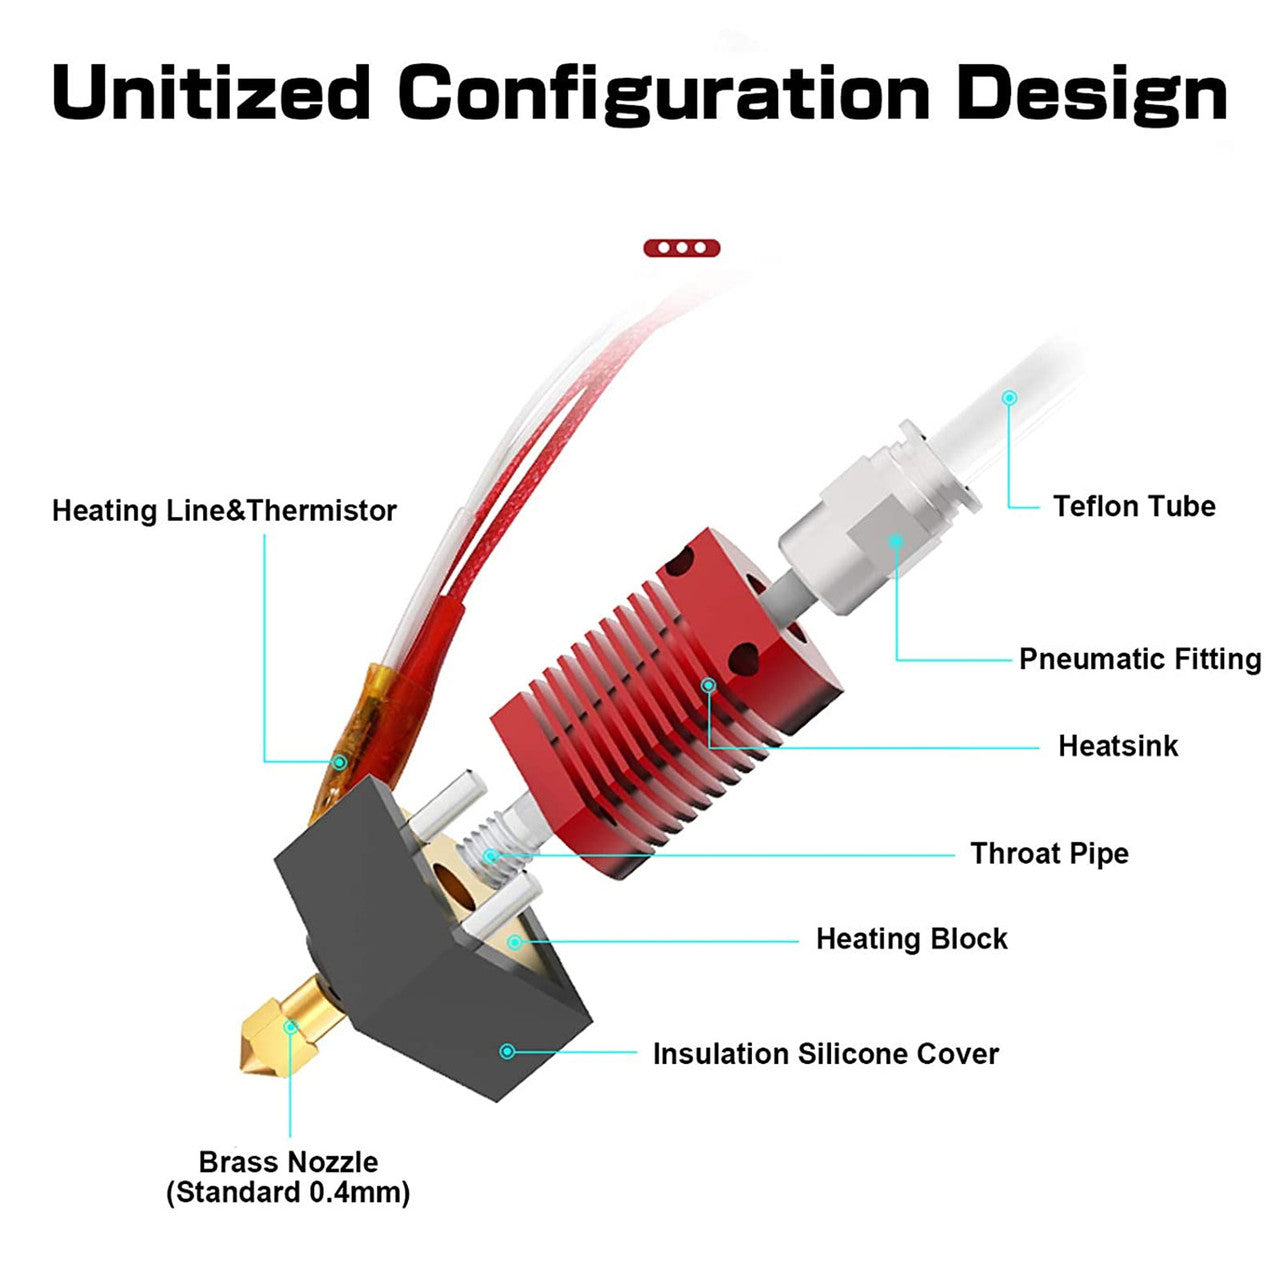 Extruder Heater Hot End Nozzle Kit for 3D Printers